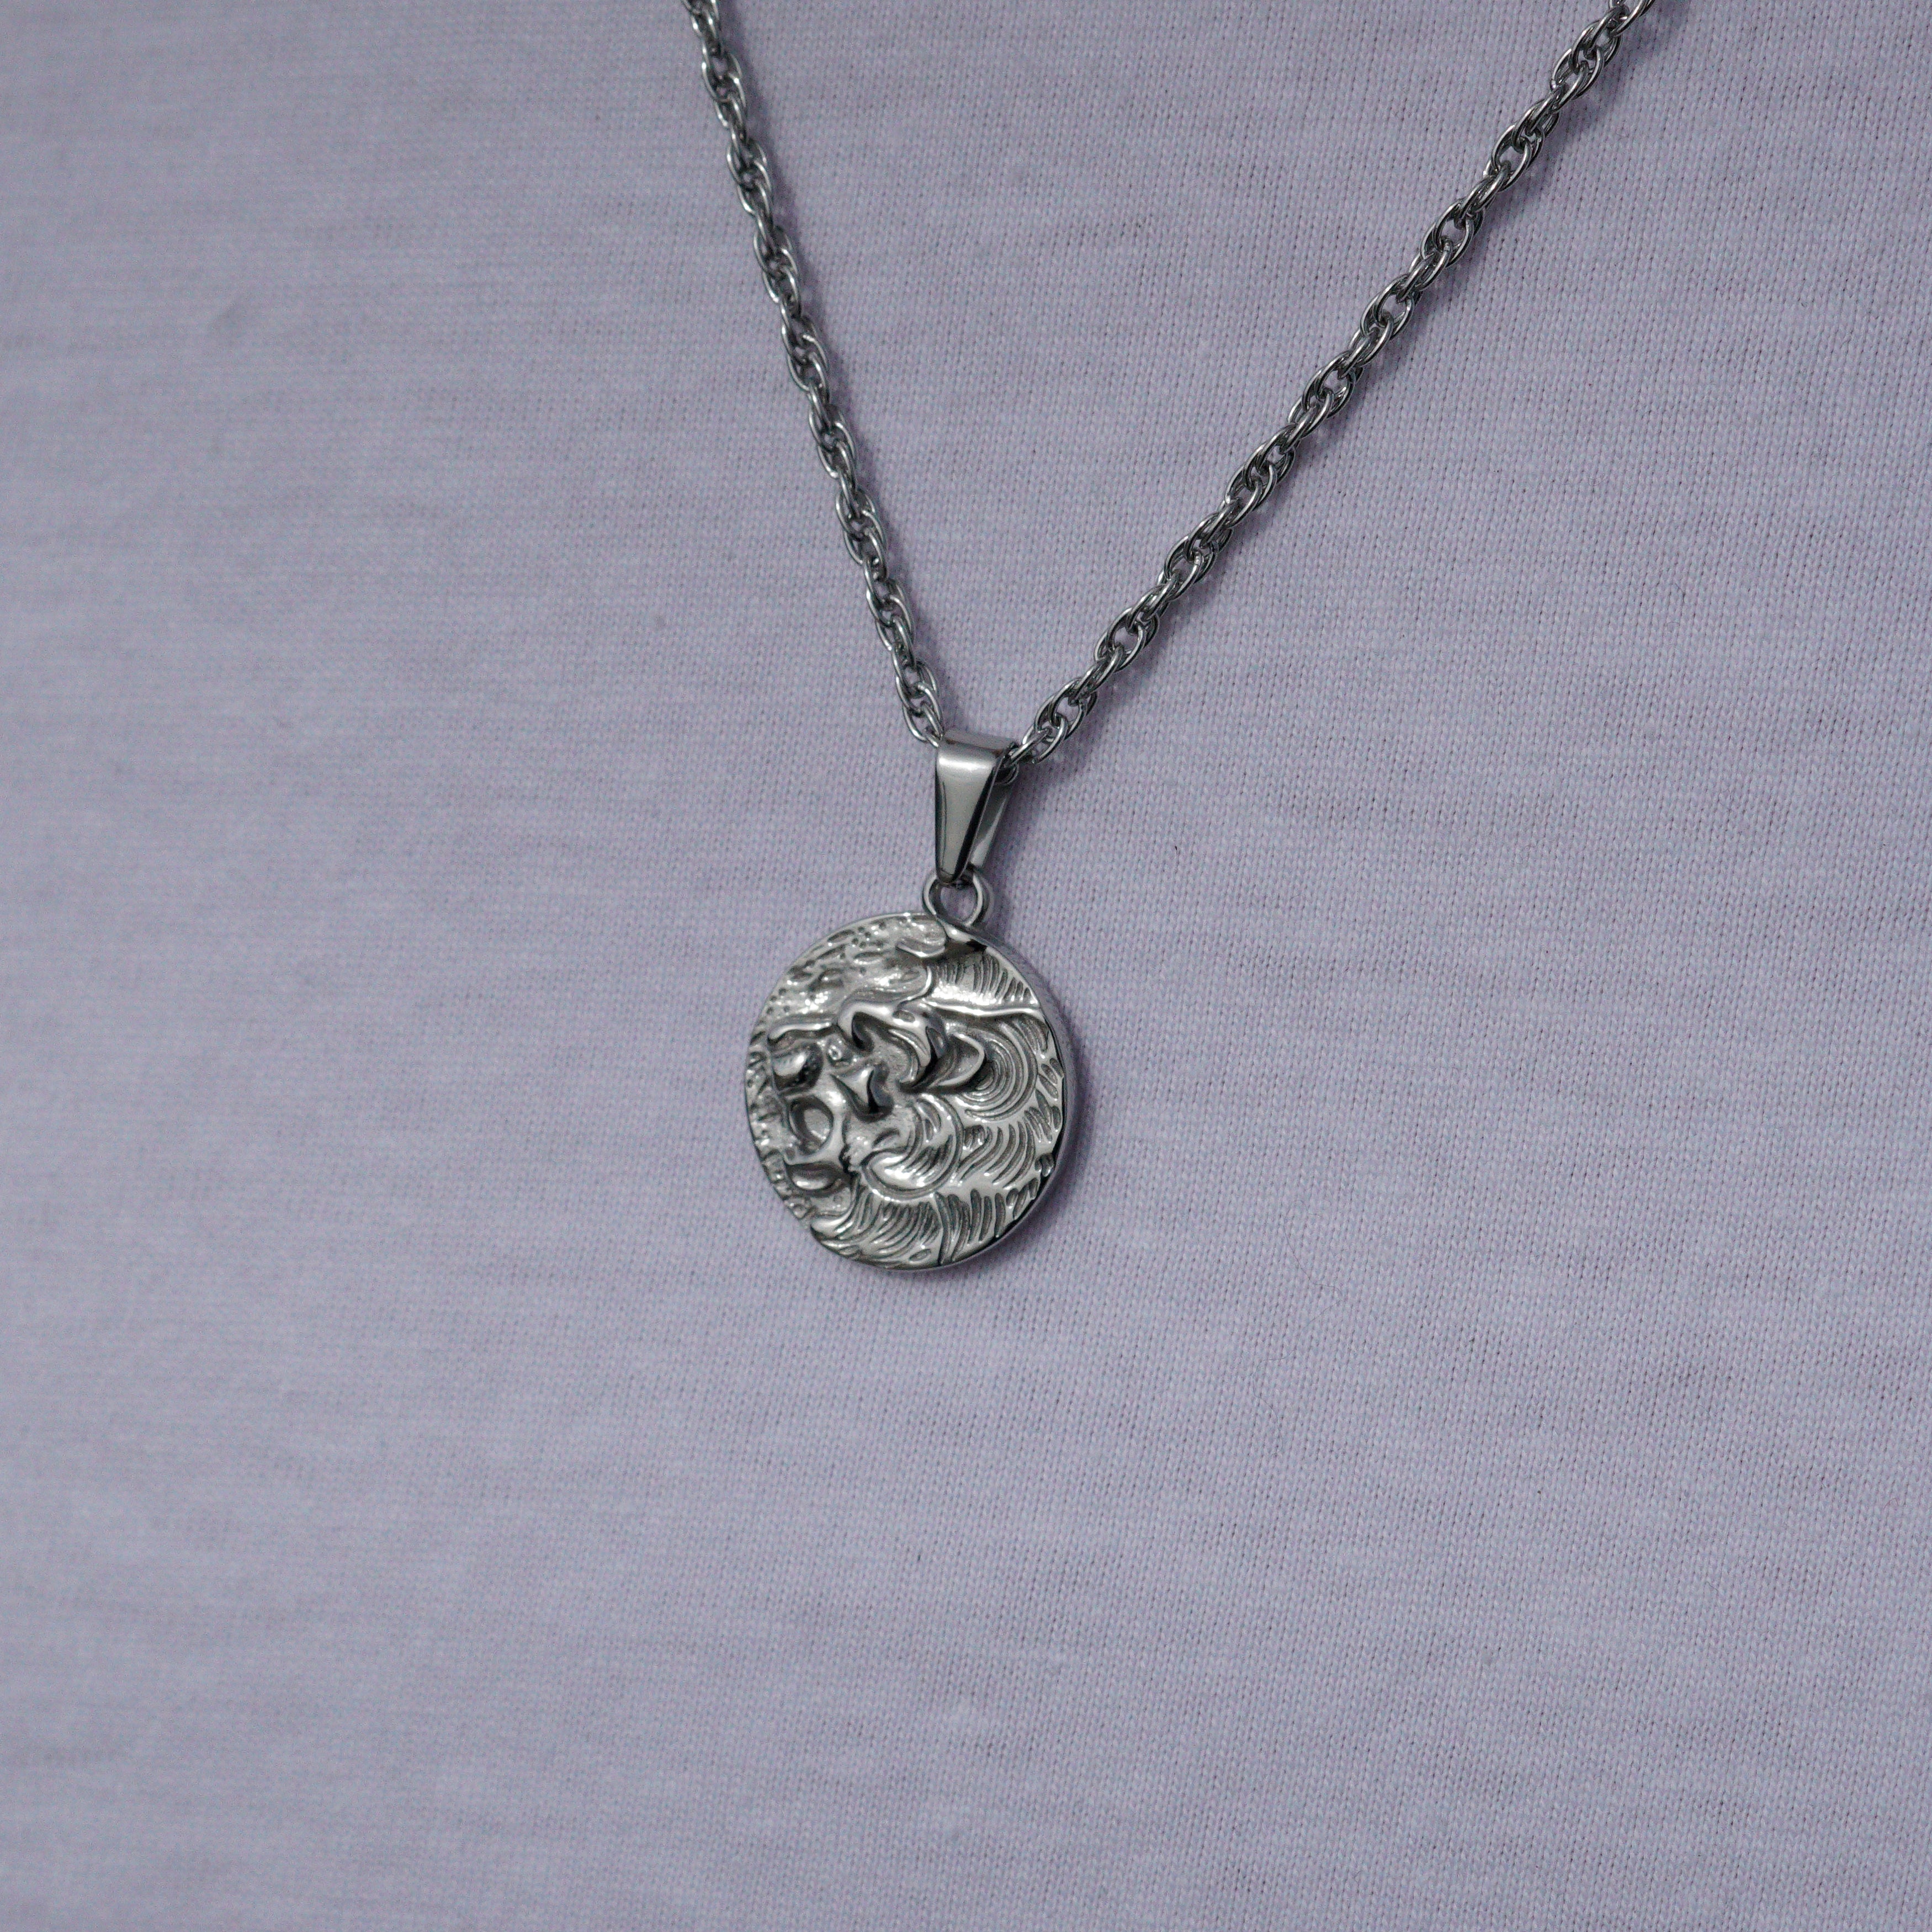 MAD LION NECKLACE - SILVER TONE